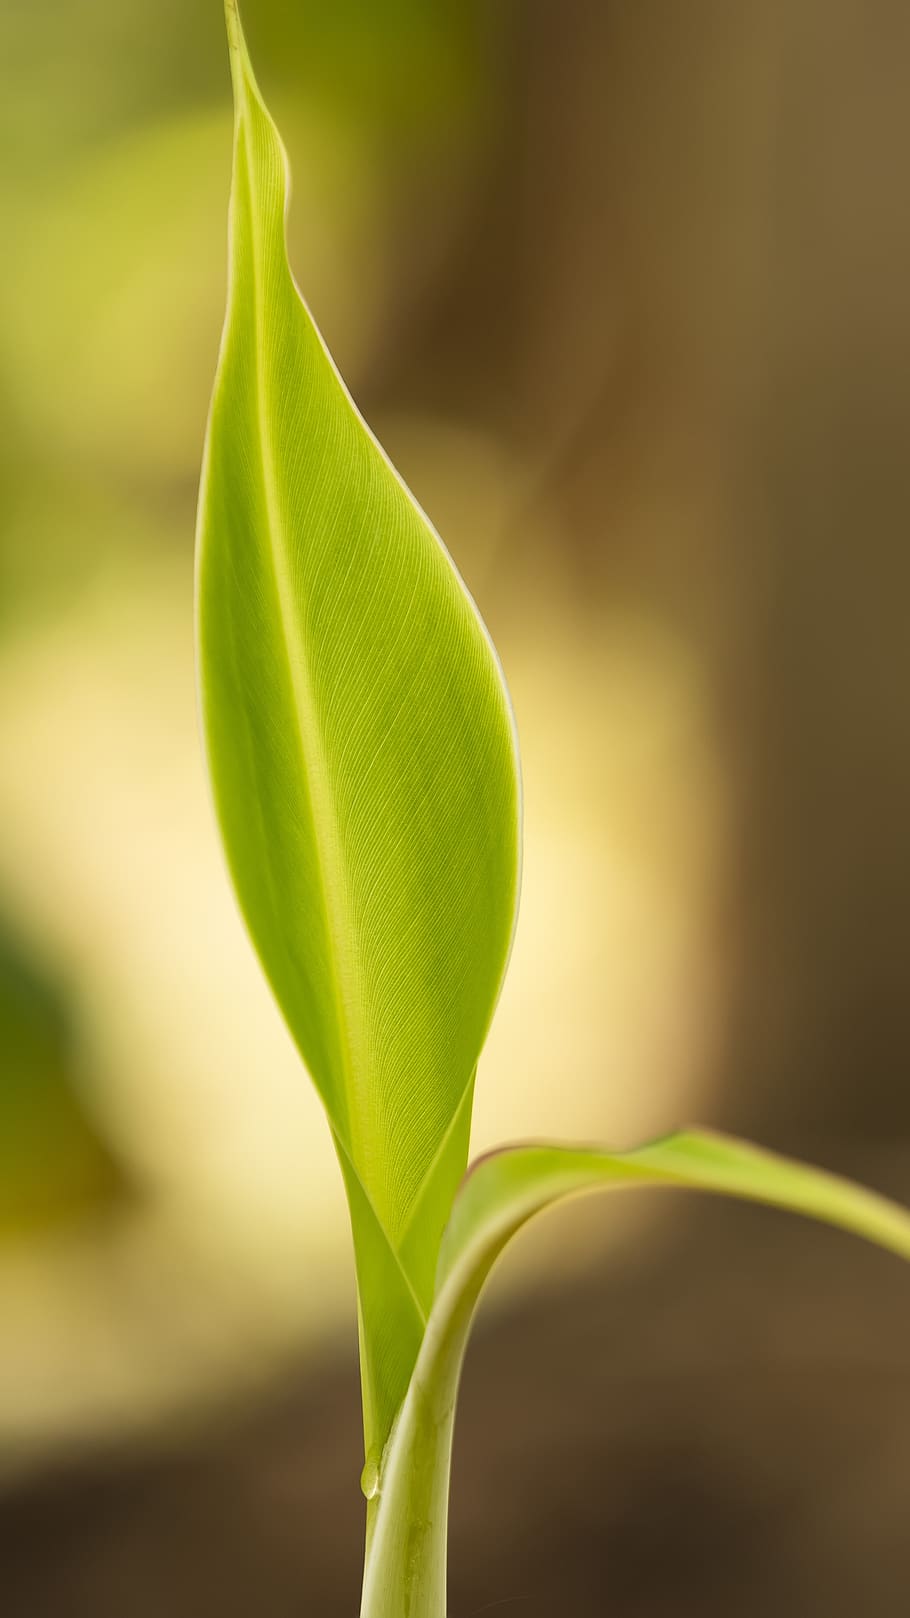 banana, leaf, green, fresh, natural, green color, plant, beauty in nature, plant part, close-up